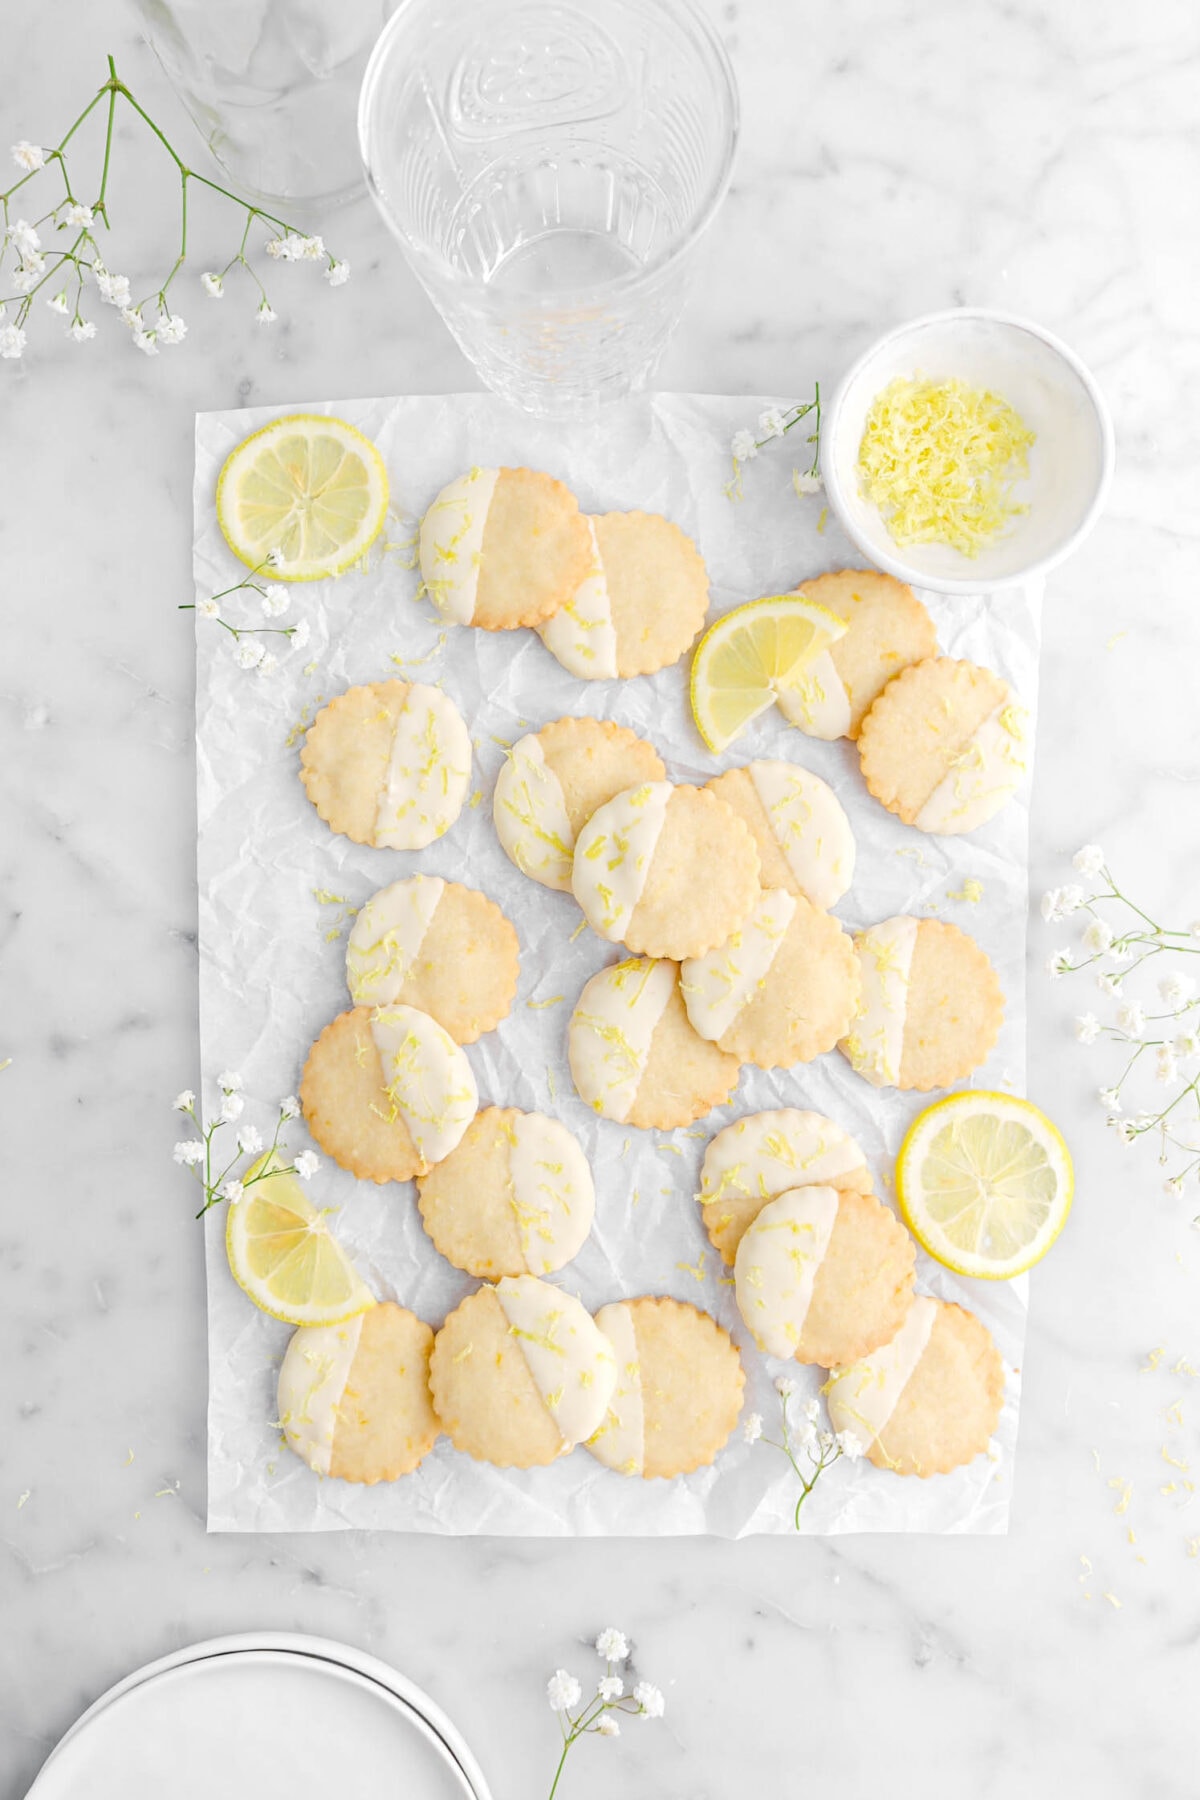 pulled back overhead shot of lemon shortbread cookies on parchment paper with white flowers around, lemon slices, an empty glass, and two small white plates around on marble surface.